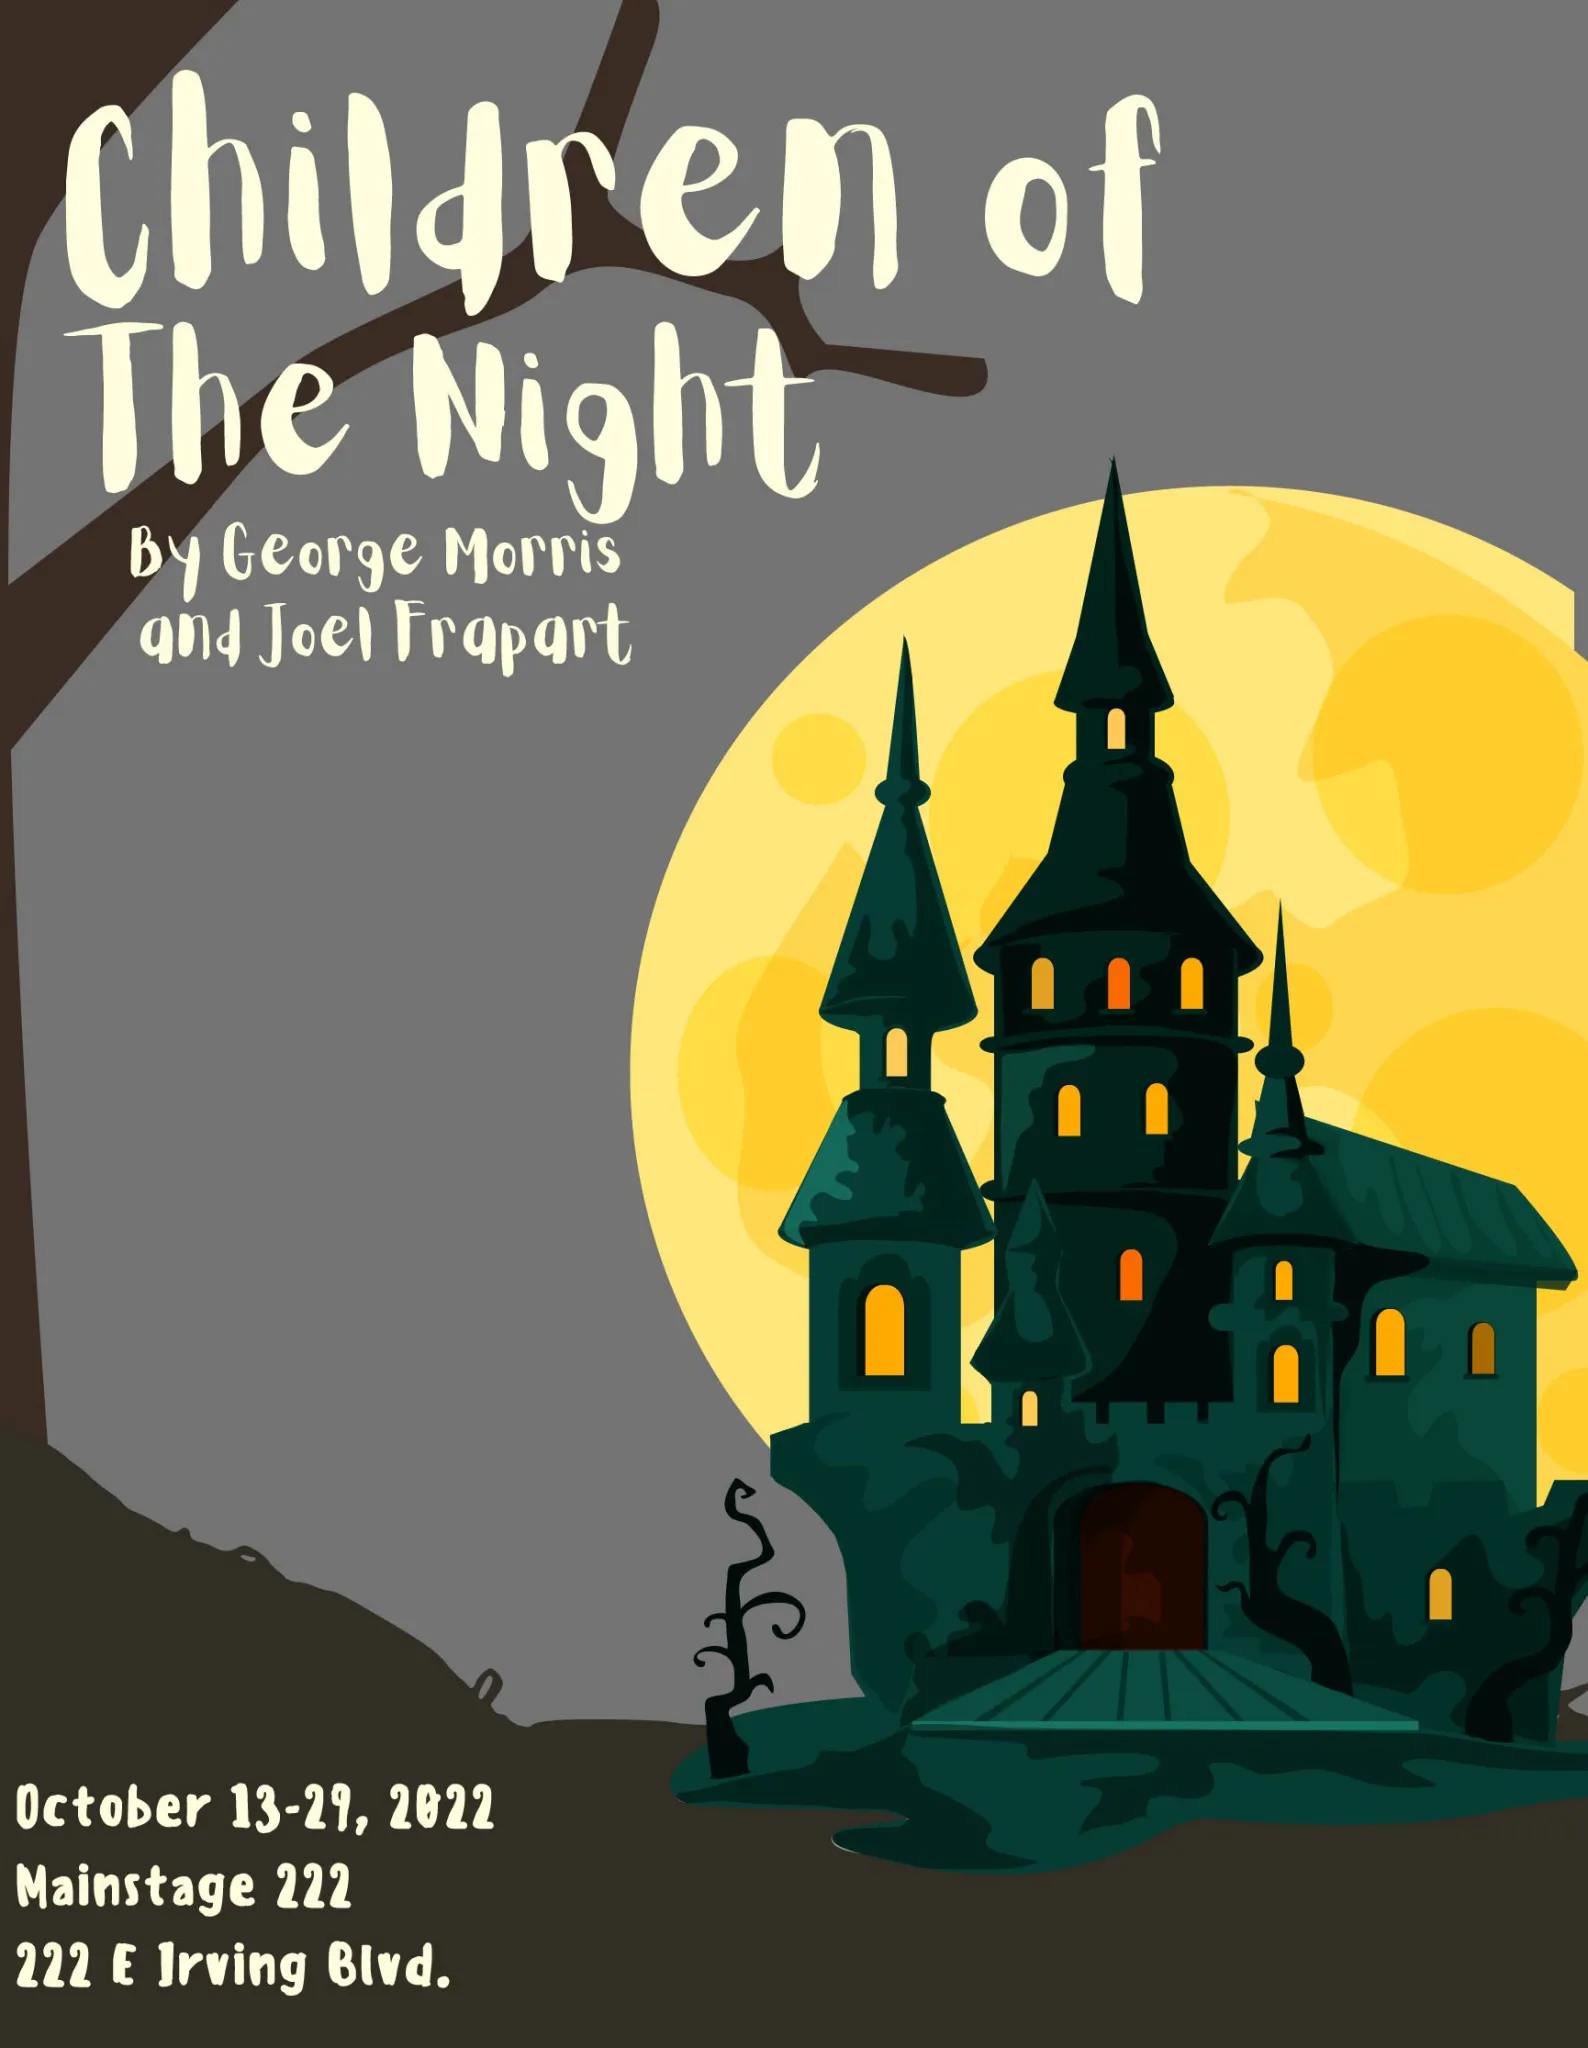 Broadsheet poster for Children of the Night. It shows a Gothic castle backlit by a gigantic yellow moon.